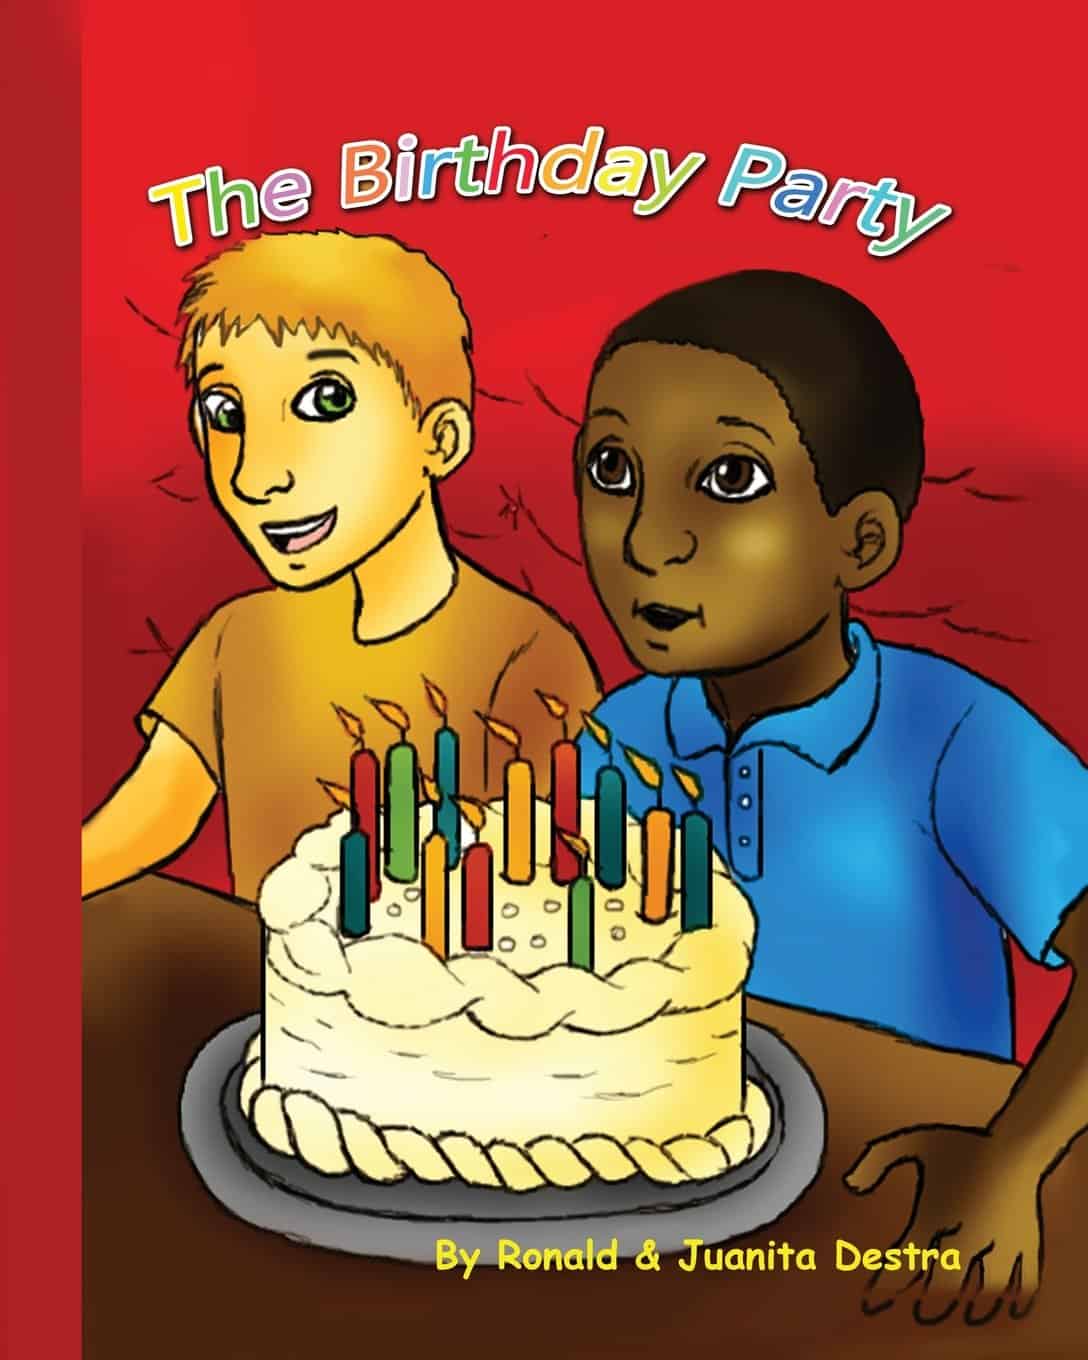 The Birthday Party by Ronald Destra